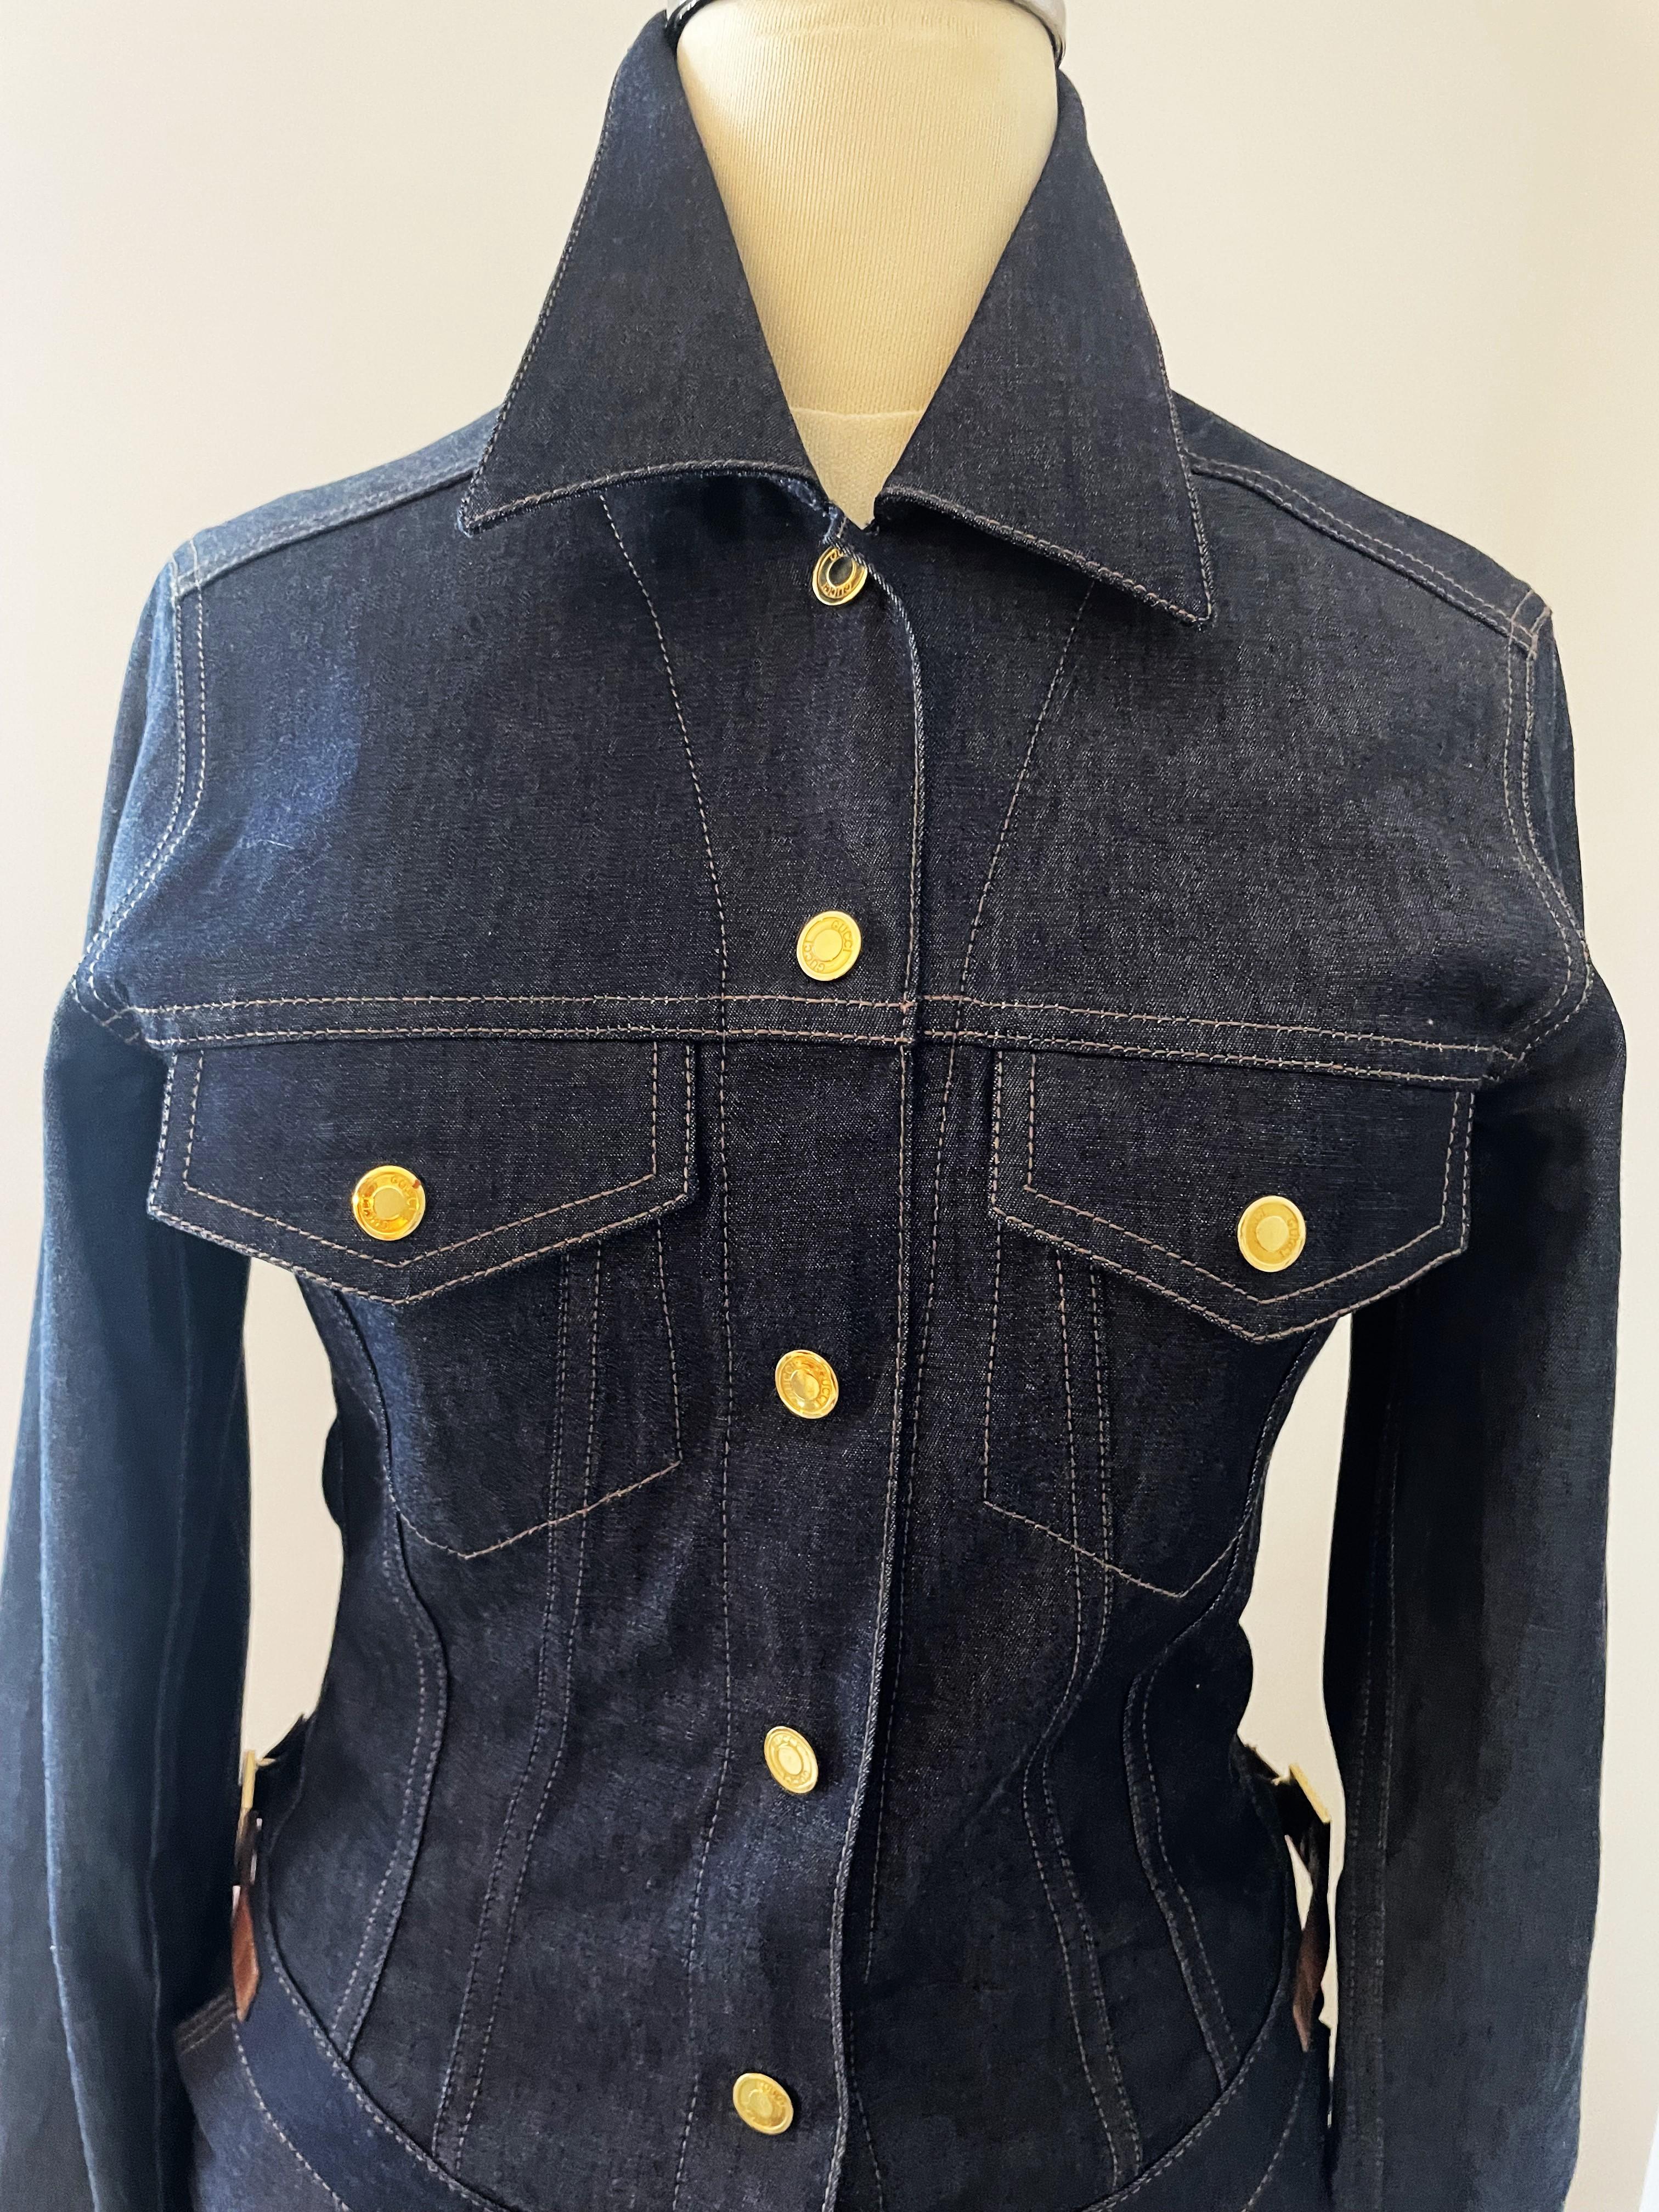 A stunning and very rare one-of-a kind Runway 1999 Gucci jacket with matching Gucci denim skirt. Nice details are the leather fasteners and gold-plated buckles with logo. Never worn. Very wel preserved by a model. 

This collectors item set is from